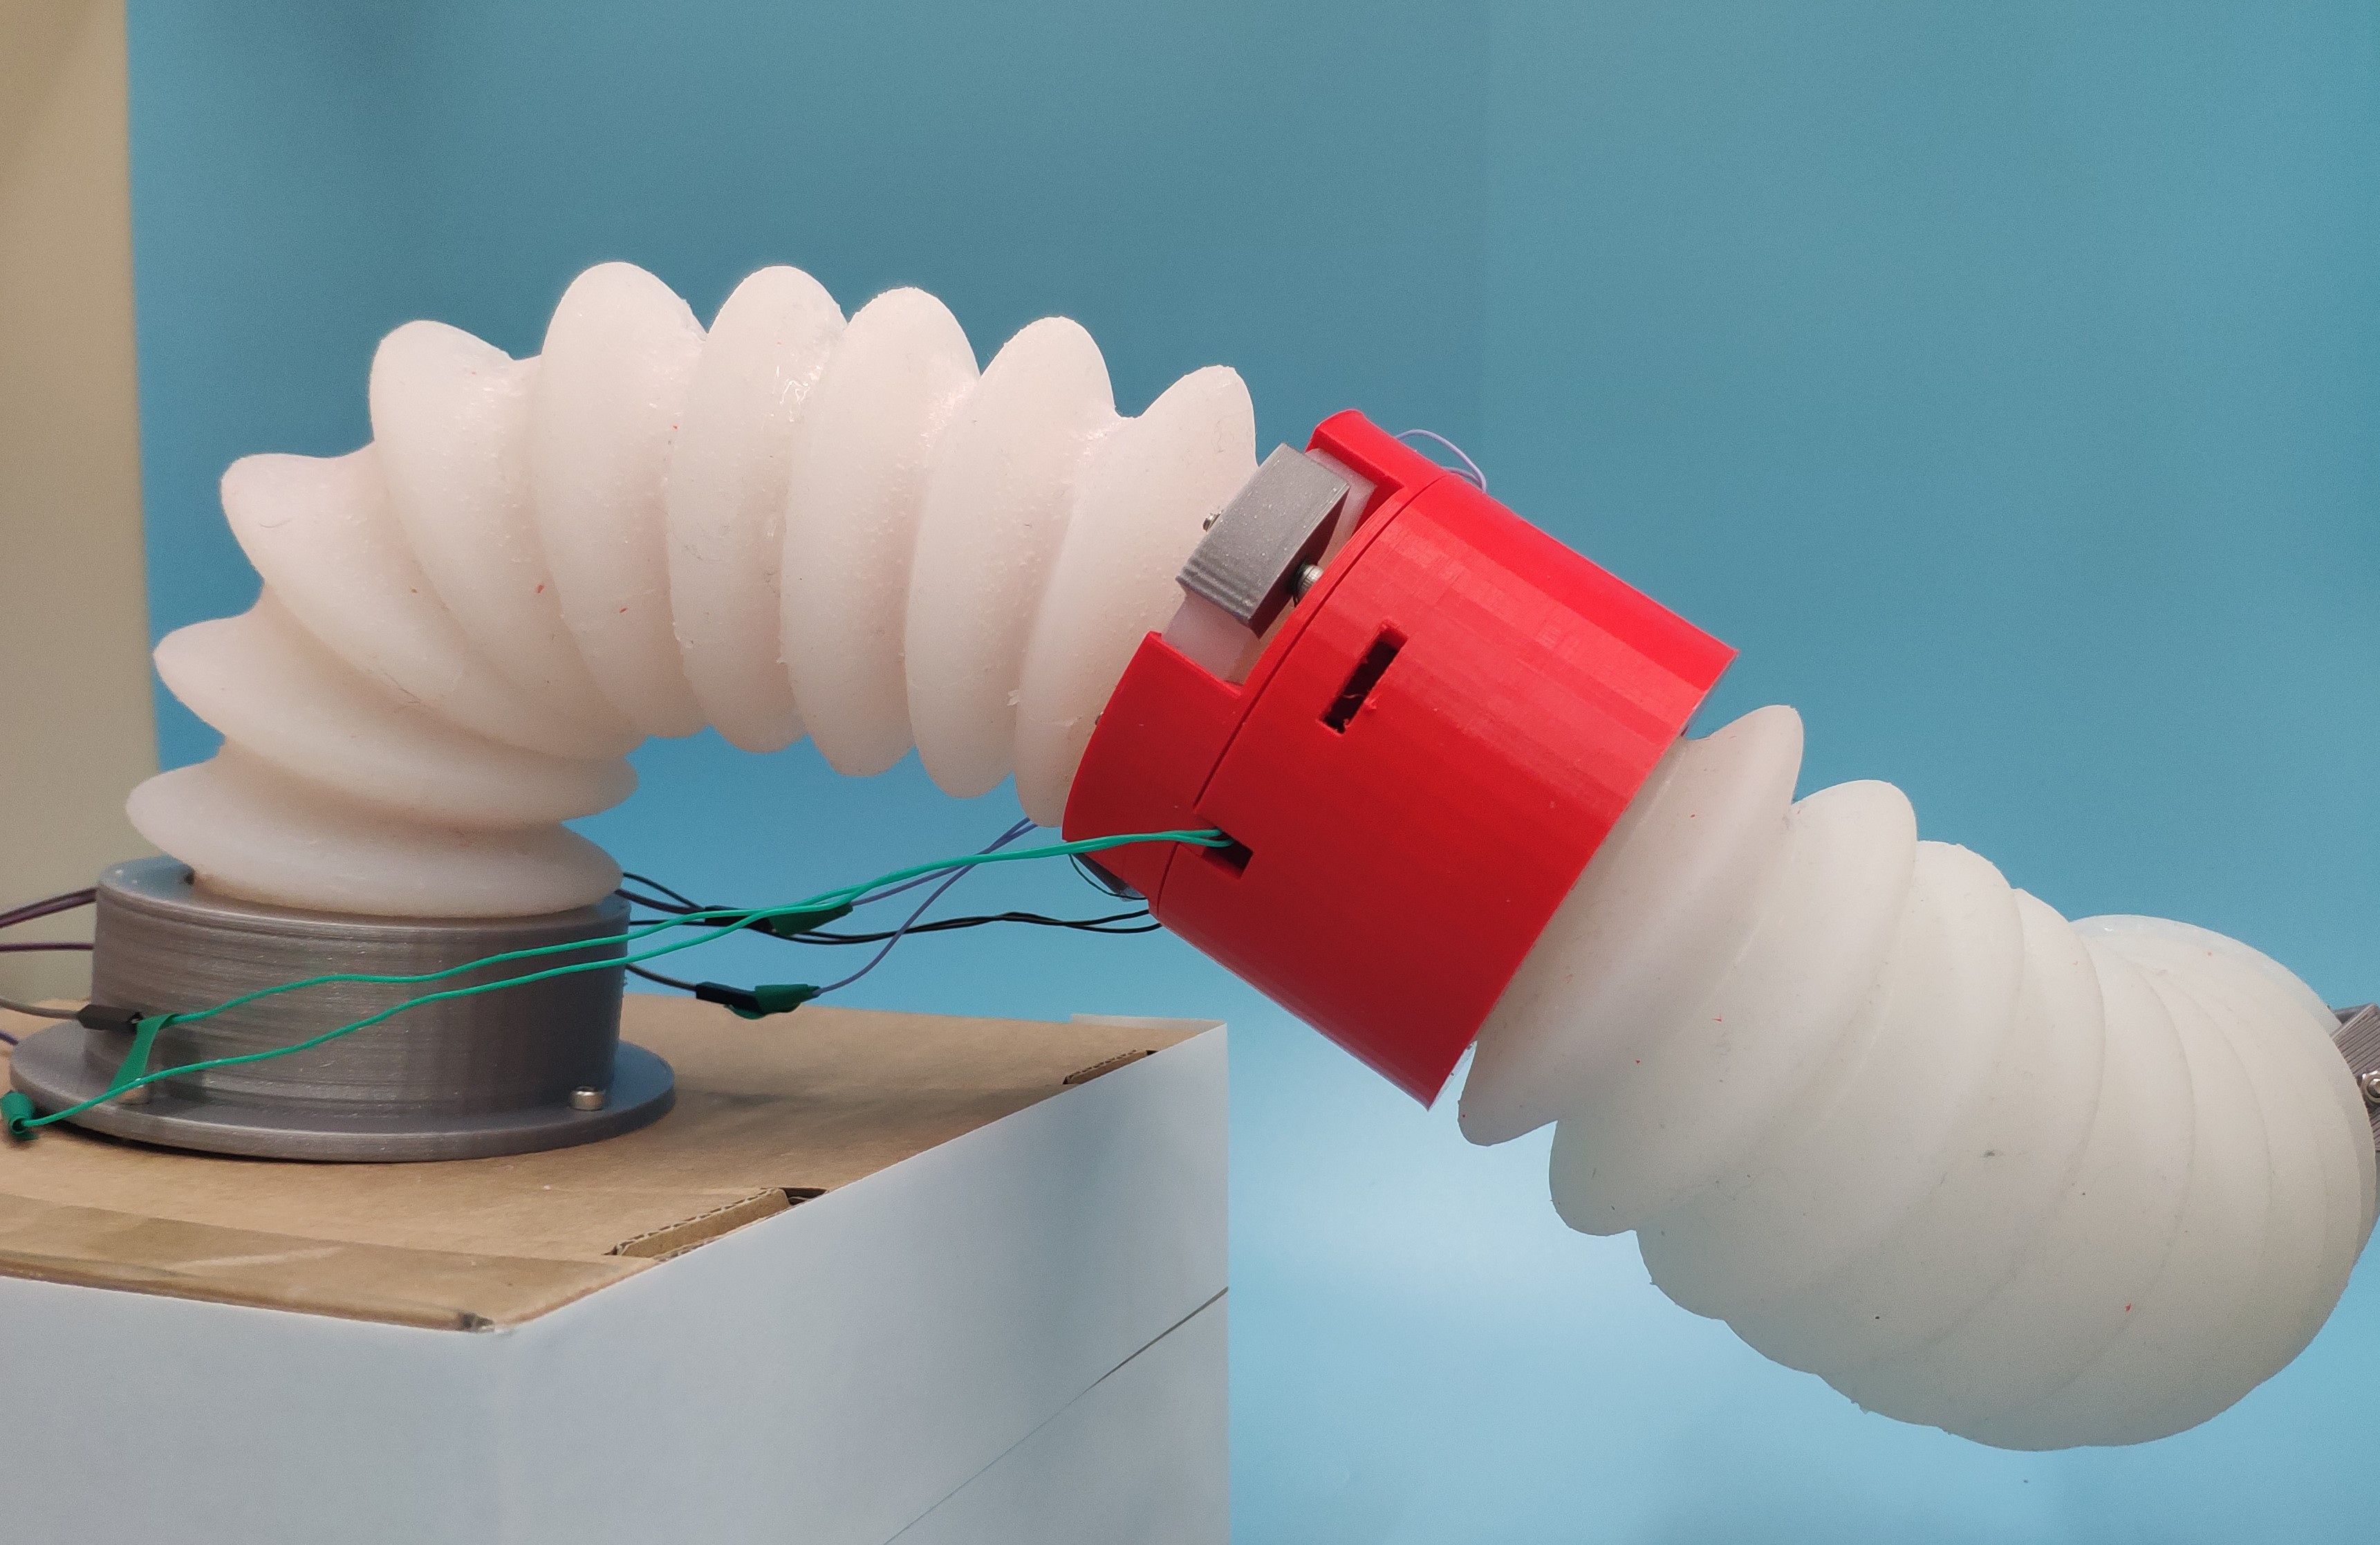 This photo shows an example of a robotic soft arm, built from two flexible white segments connected at a red elbow